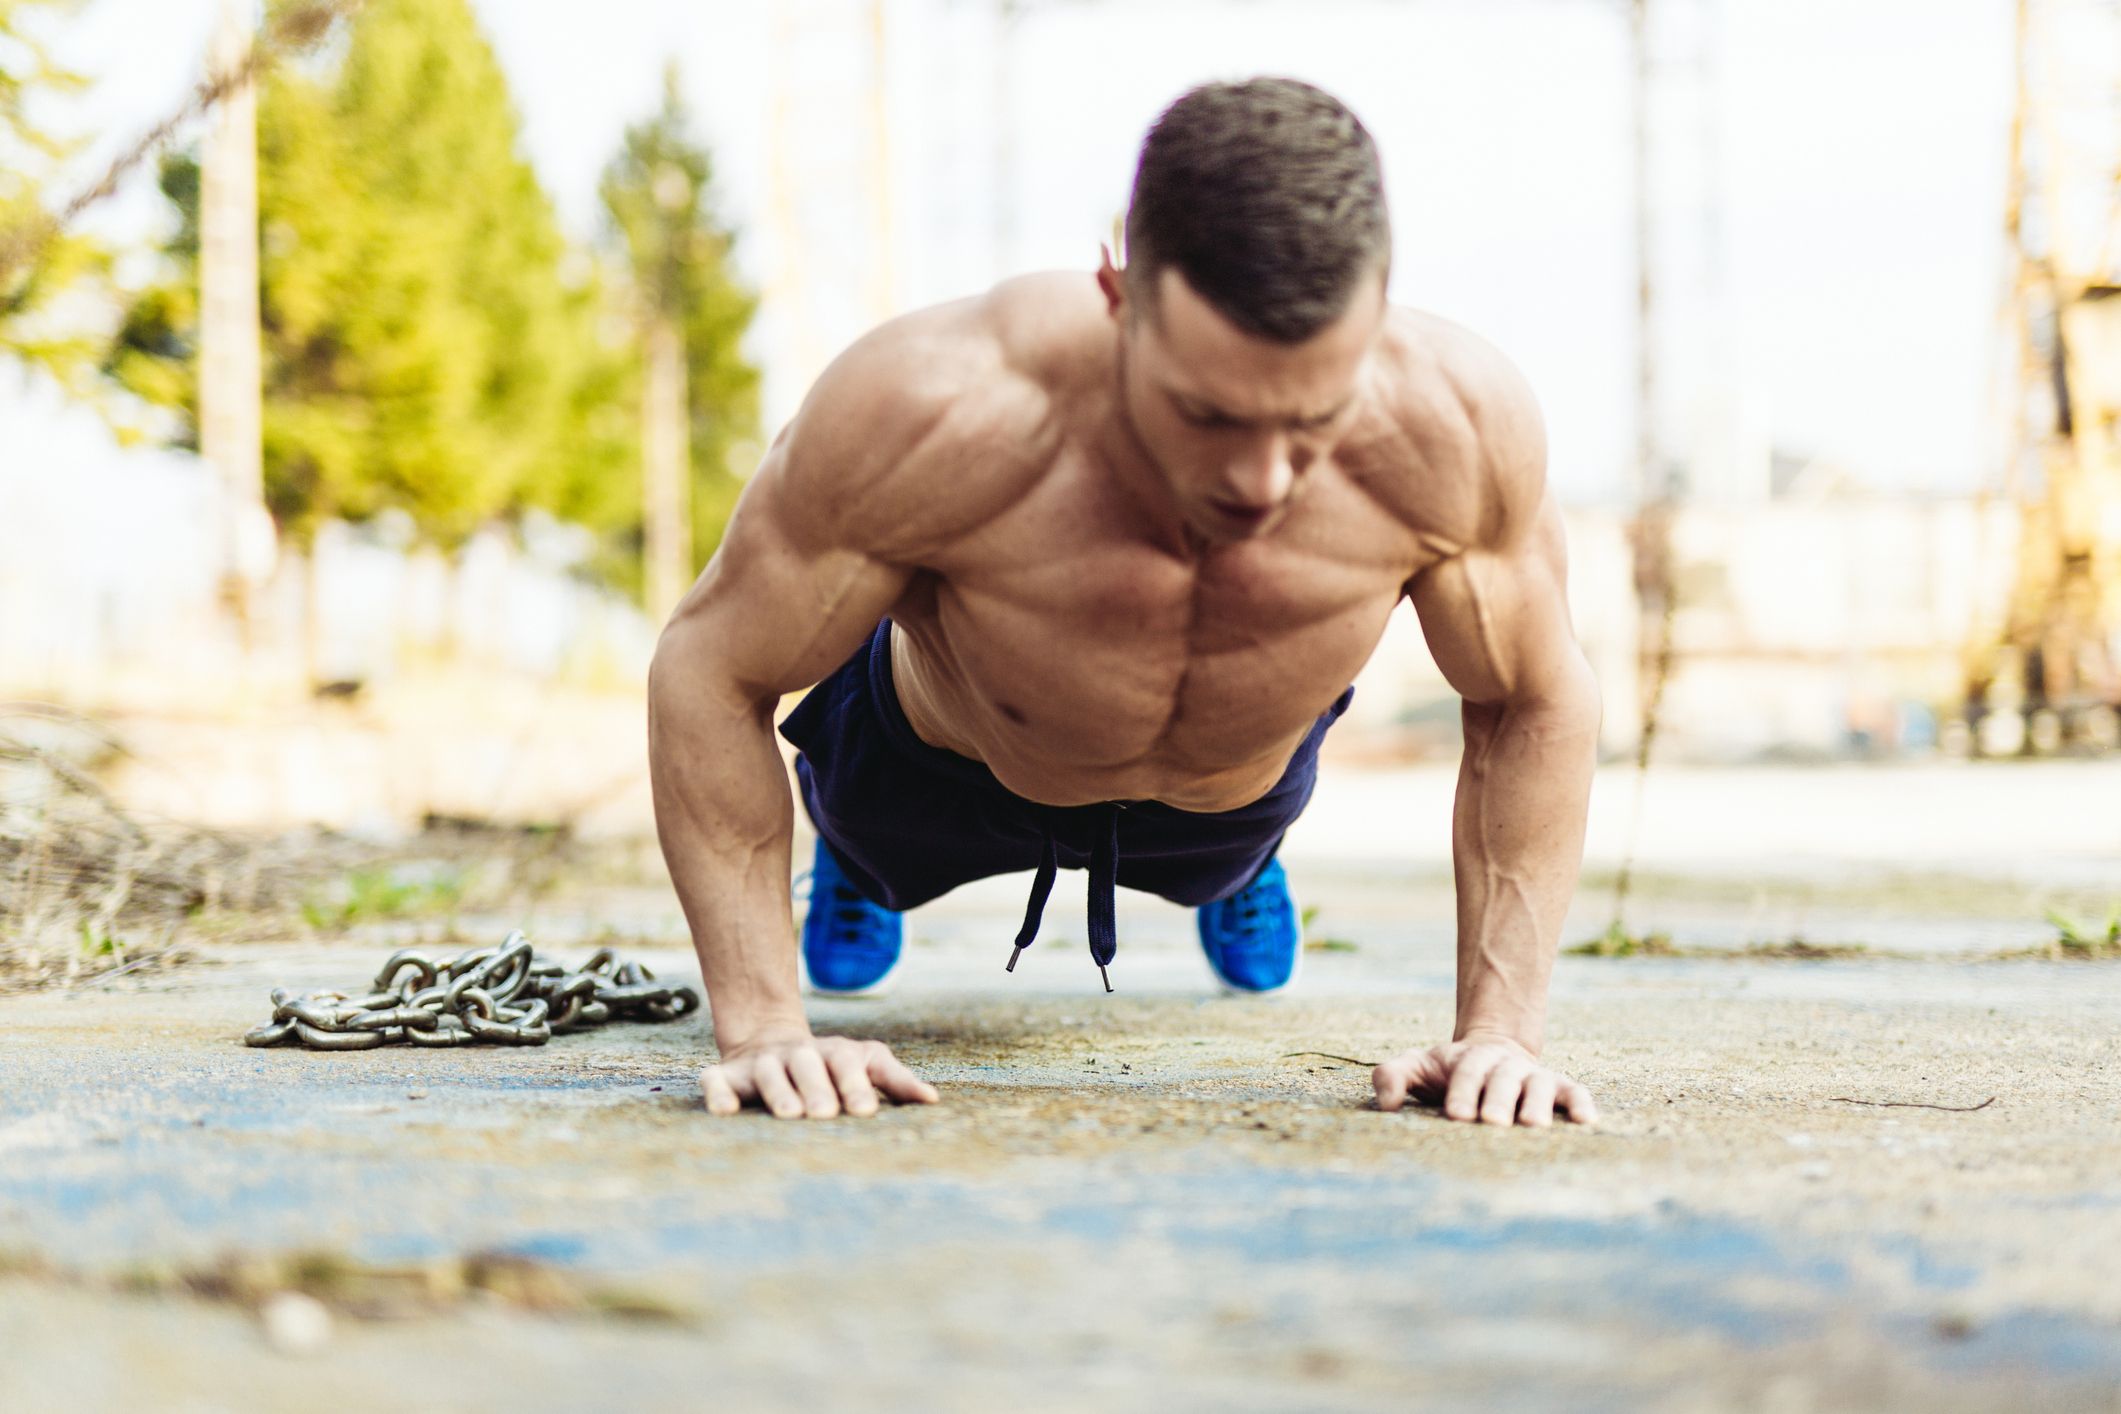 We found a tough plyo push-up for a full-body workout